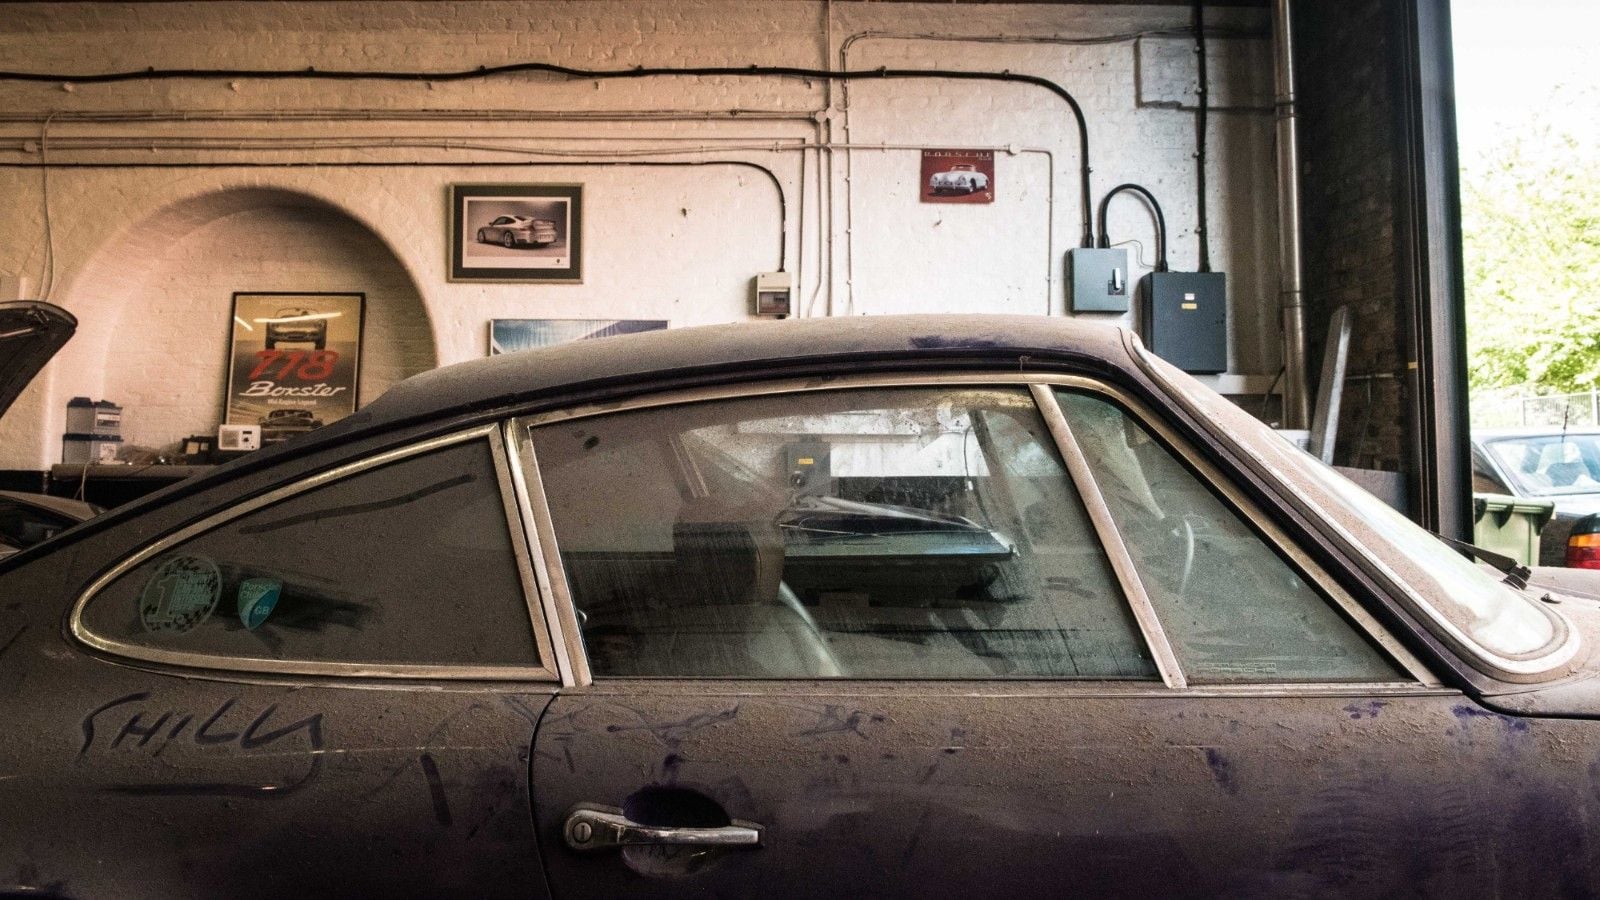 Porsche took three years to bring this barn find 911 back from the dead